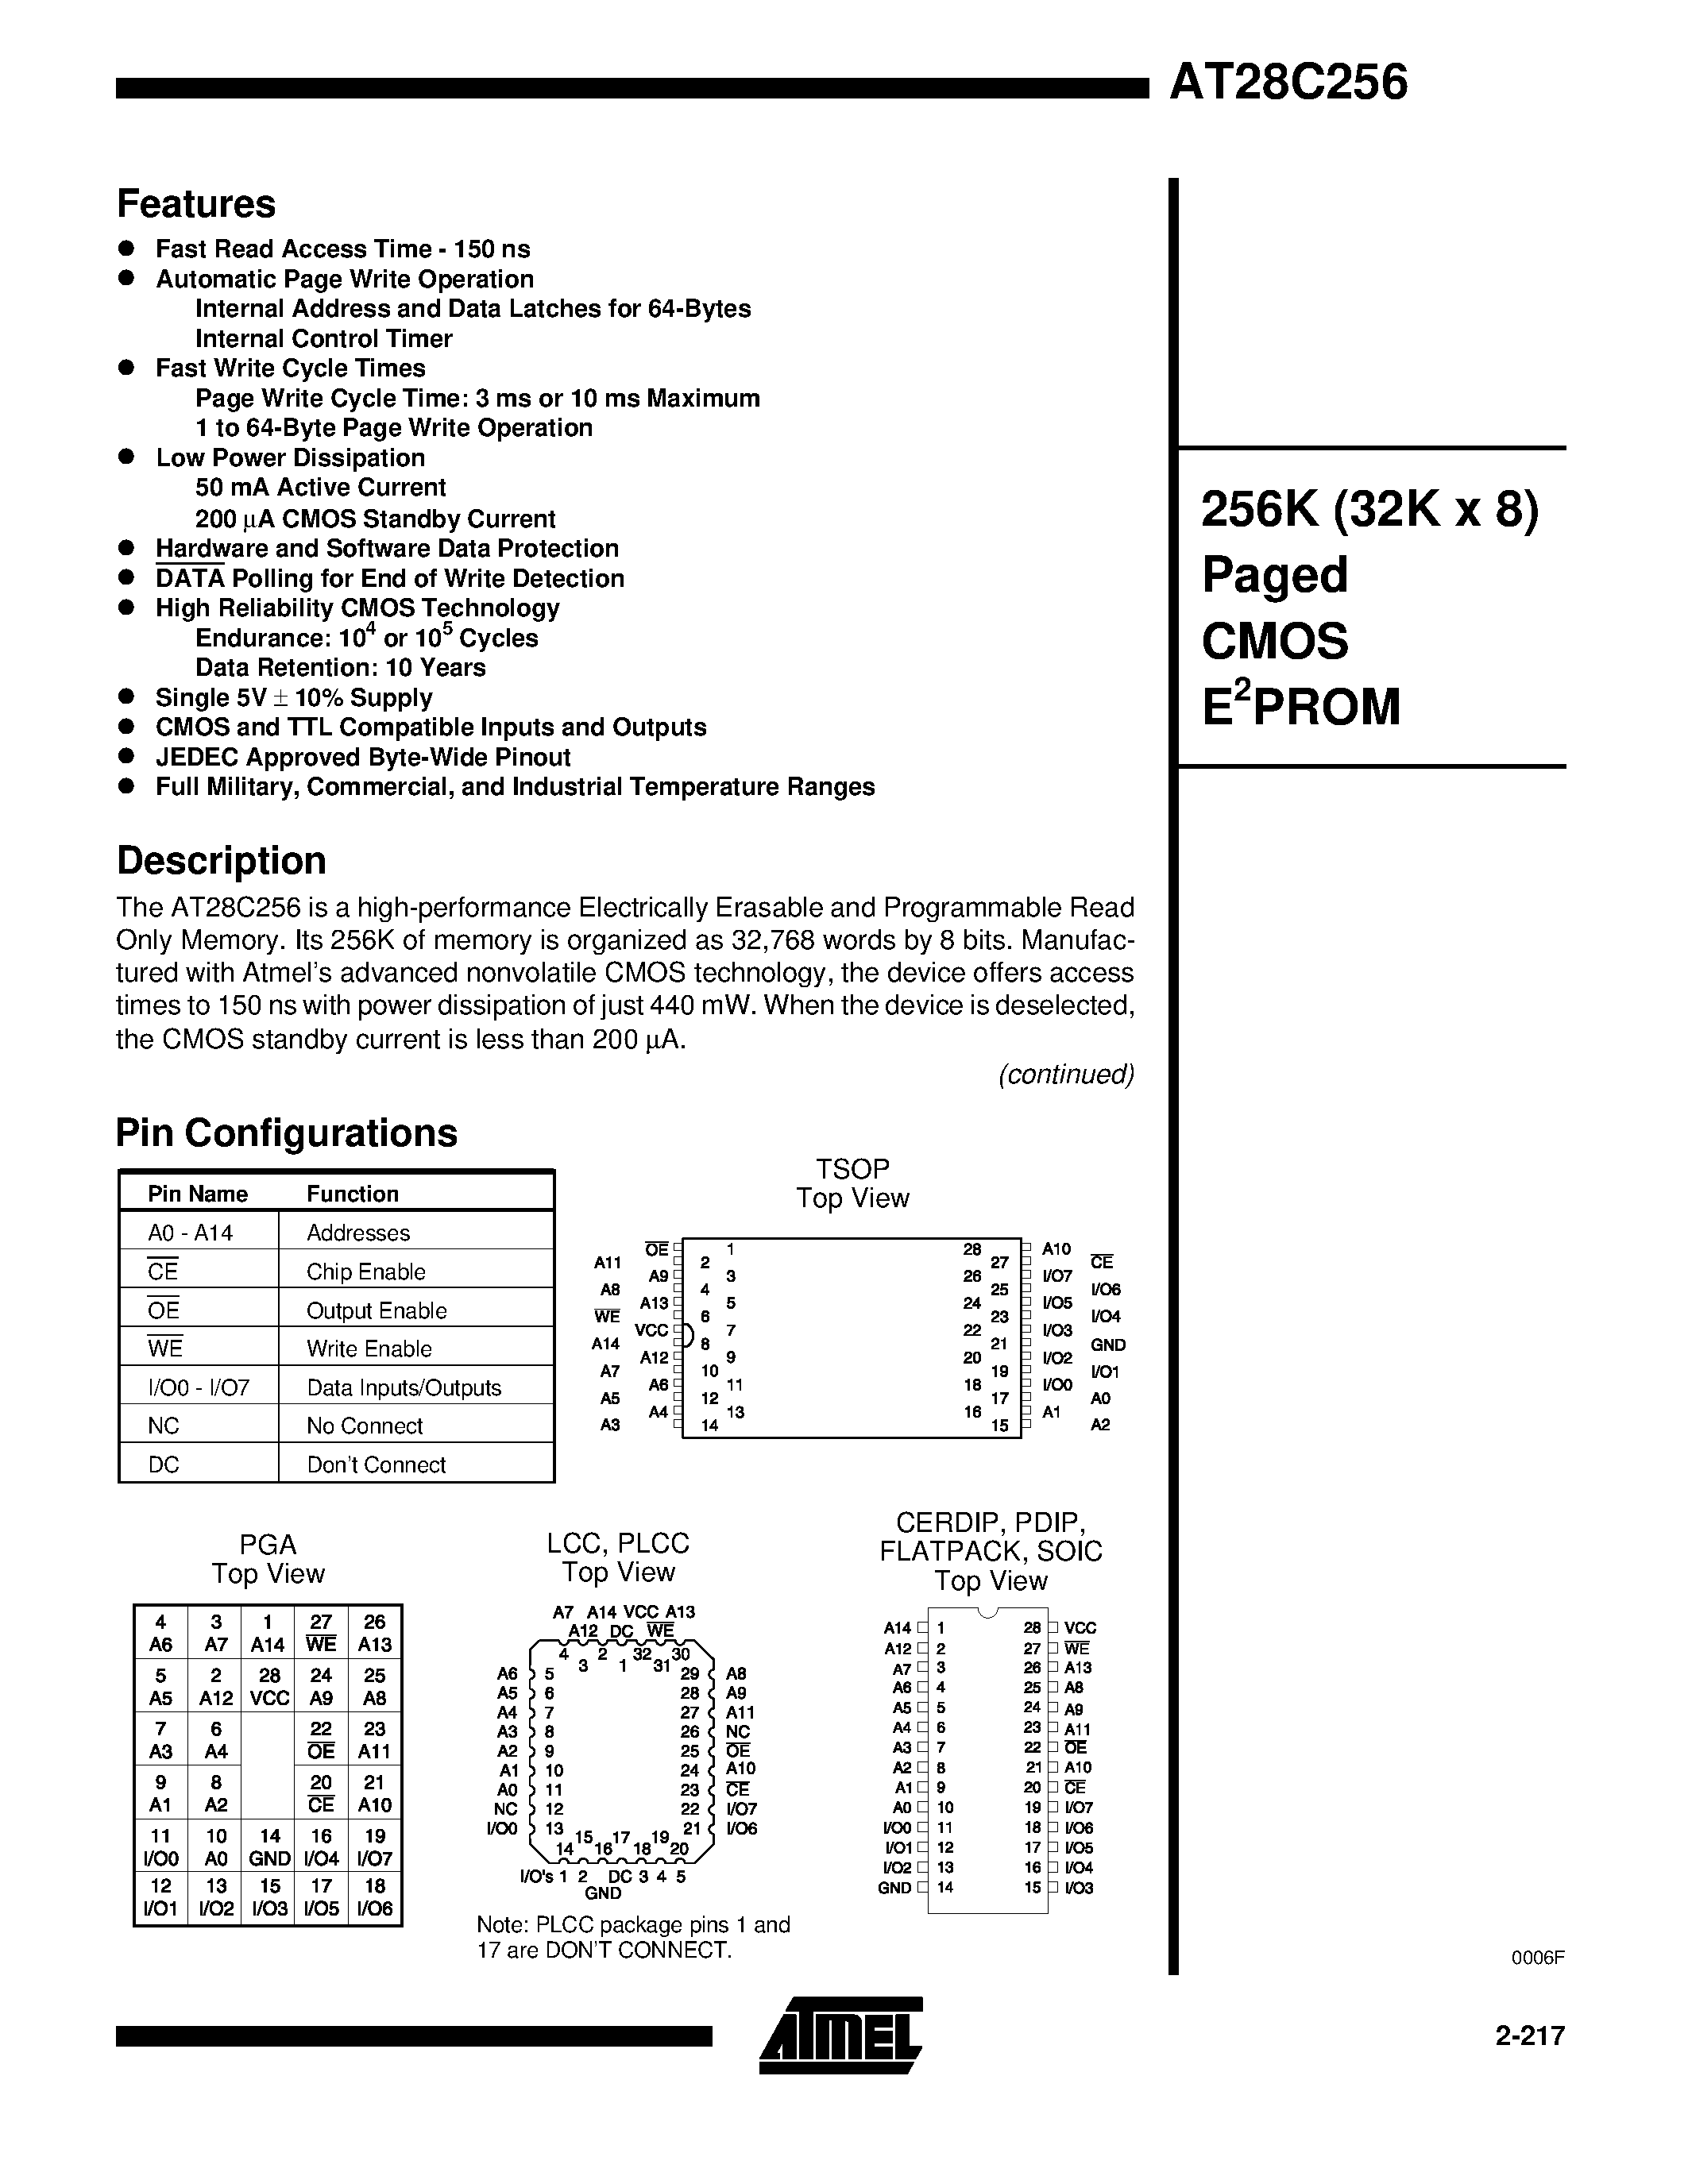 Datasheet AT28C256-W - 256K 32K x 8 Paged CMOS E2PROM page 1